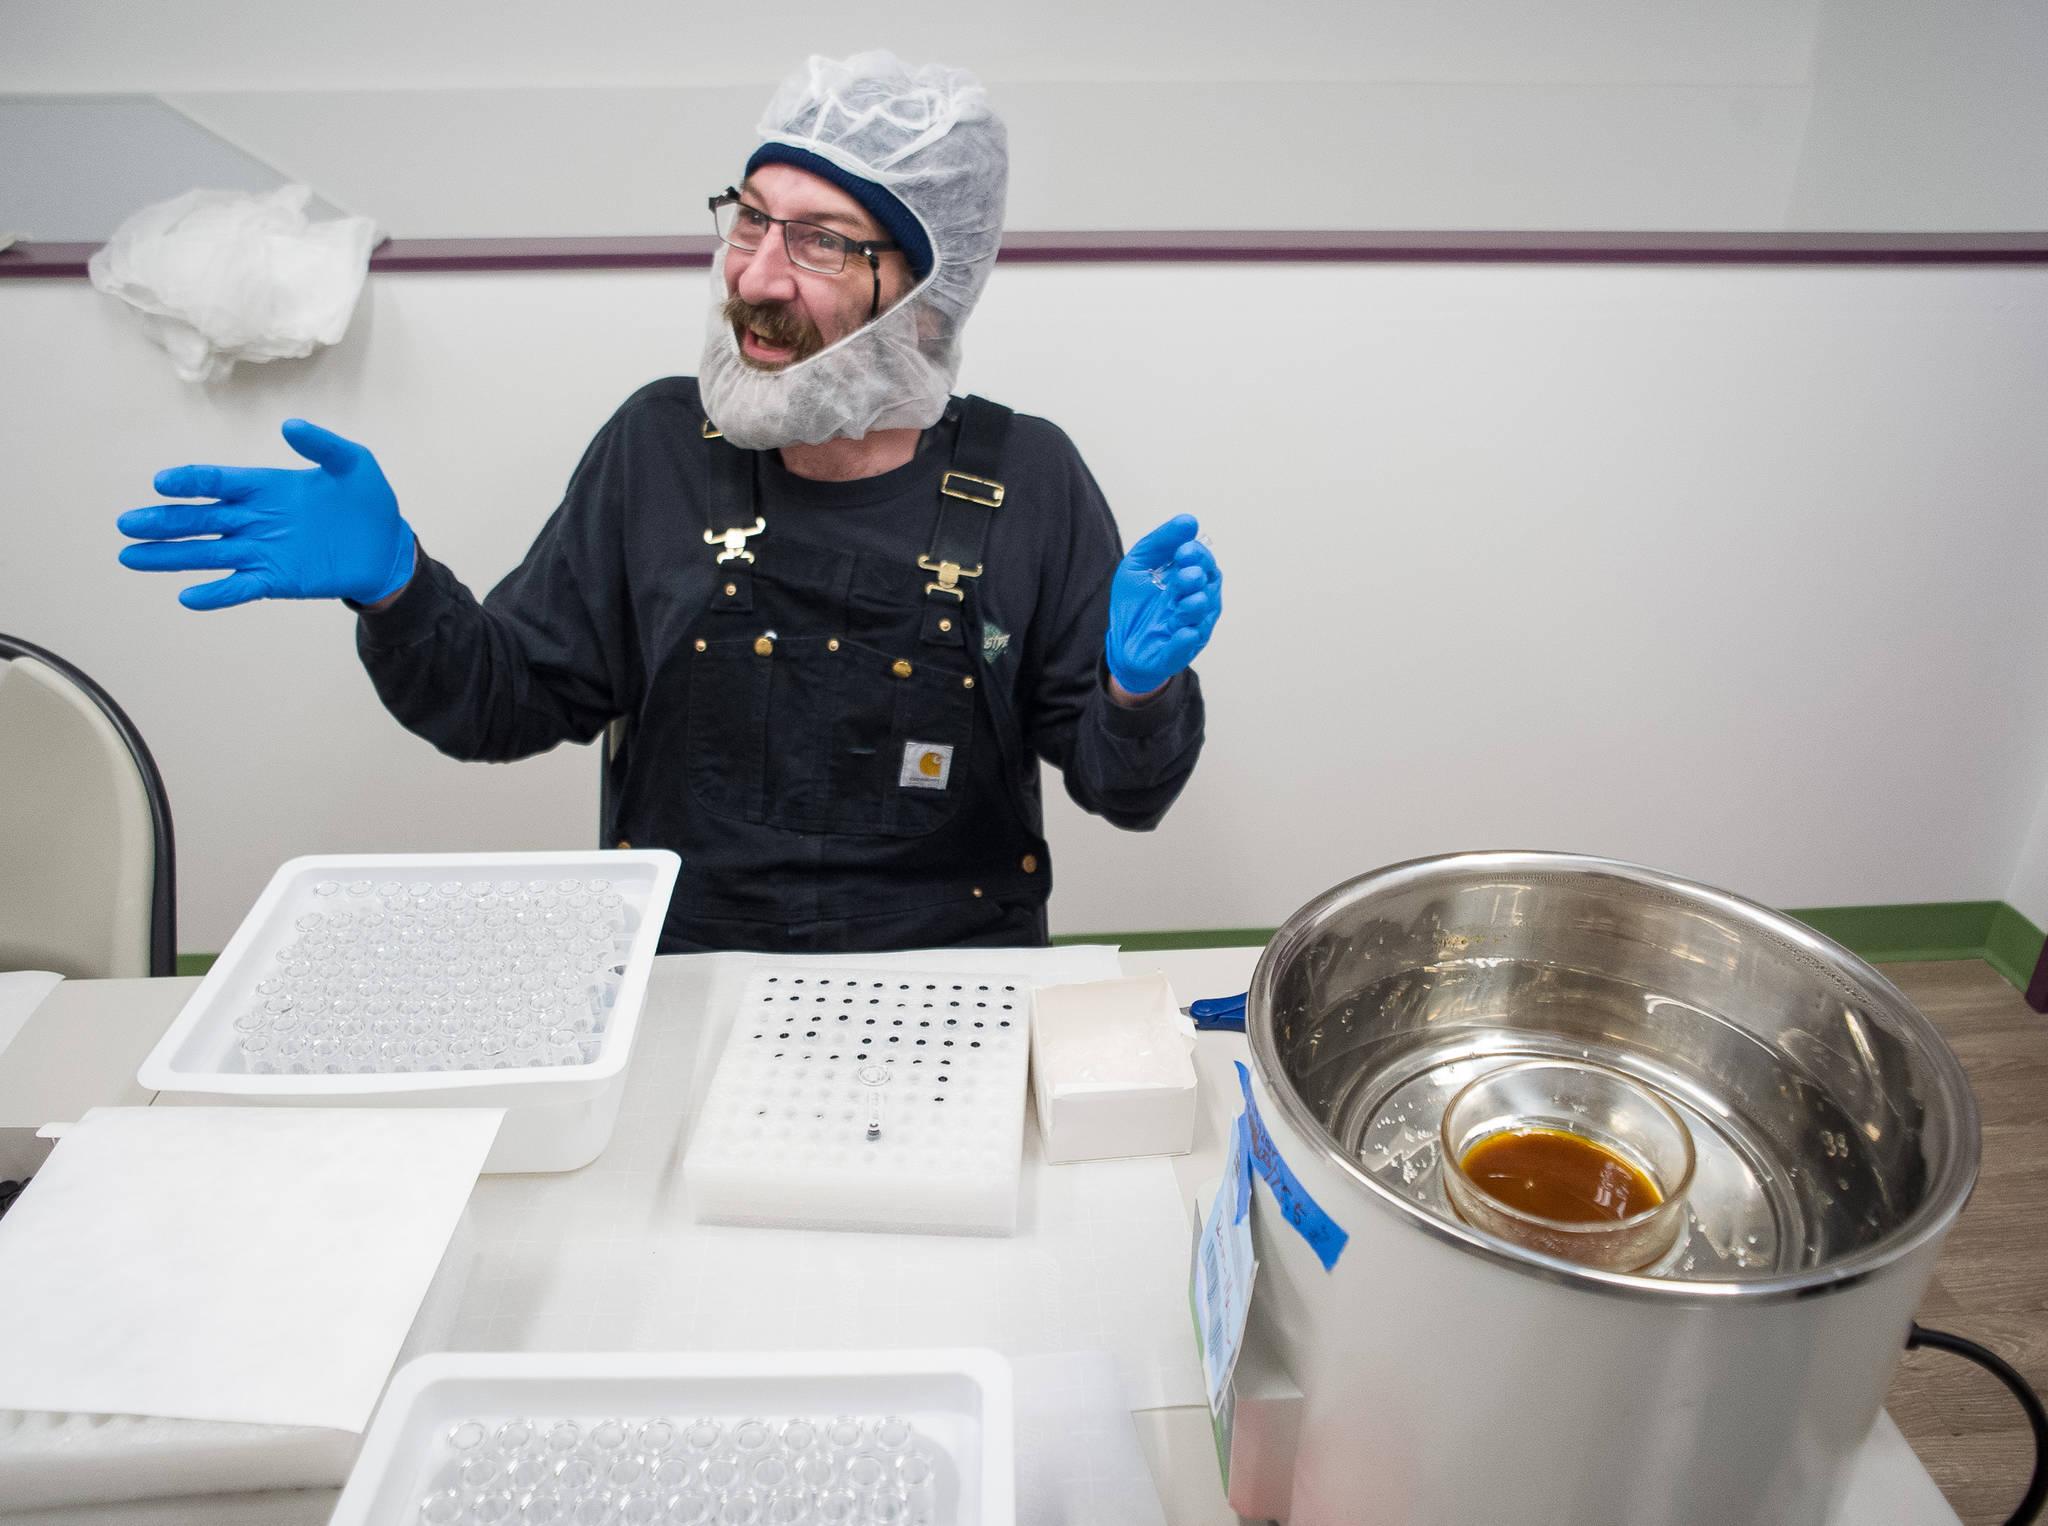 THC Alaska co-owner Ben Wilcox talks about the business of making marijuana concentrates at the Juneau facility on Thursday, July 27, 2017. Wilcox co-owns the business with his wife Lacy Wilcox, John Nemeth and Tracy LaBarge. (Michael Penn | Juneau Empire)